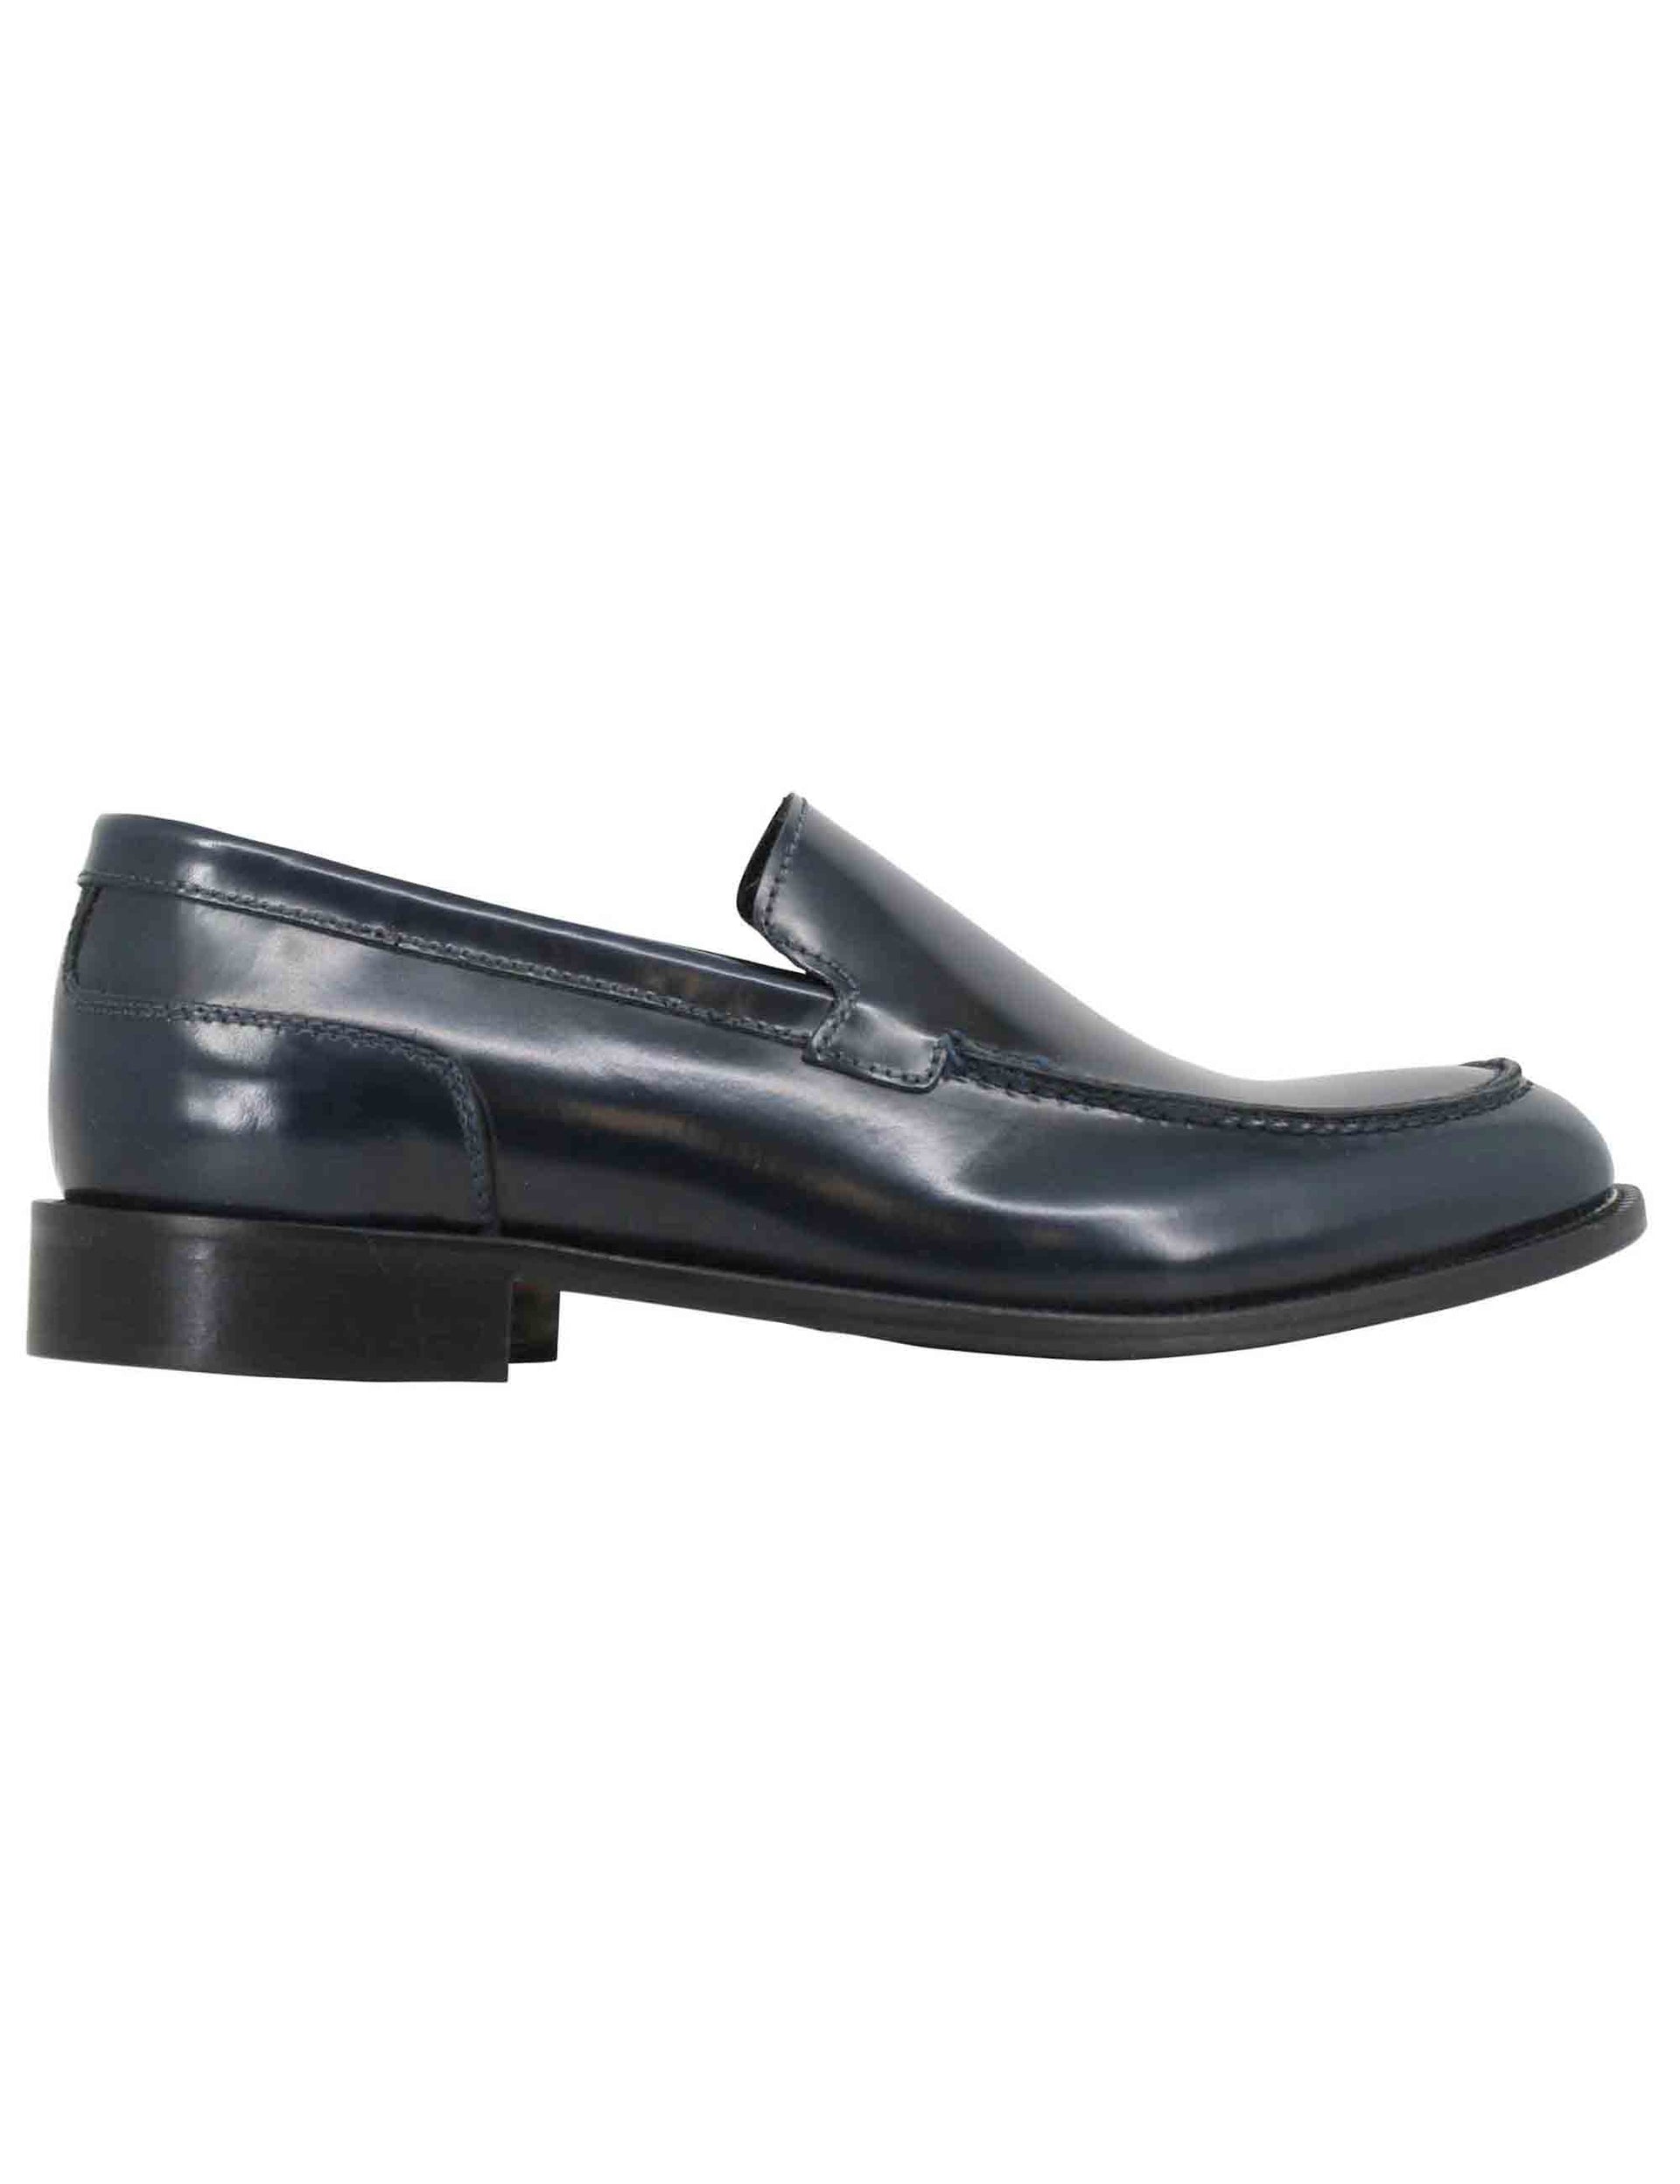 Men's blue leather loafers with smooth flap and stitched leather sole